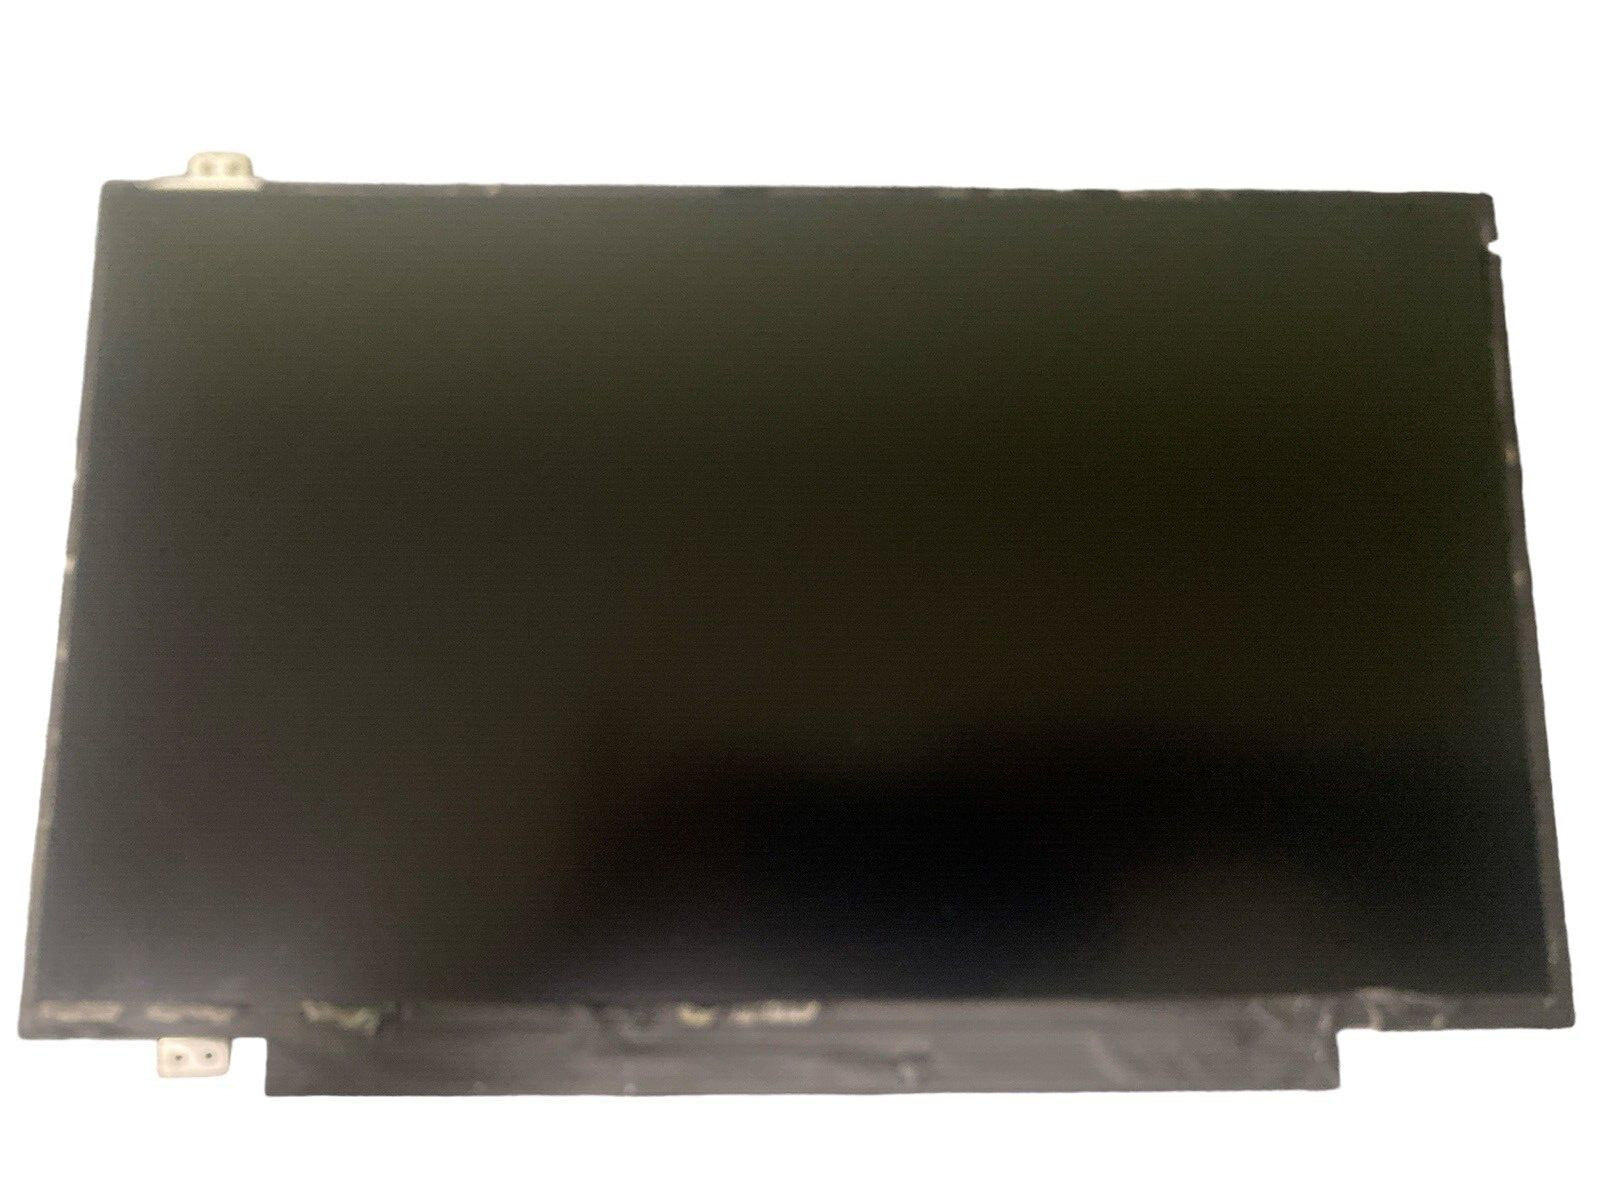 Primary image for Dell Latitude E7470 14.0" 1920x1080 LED Screen LCD LAPTOP 06J1Y3 NV140FHM-N43